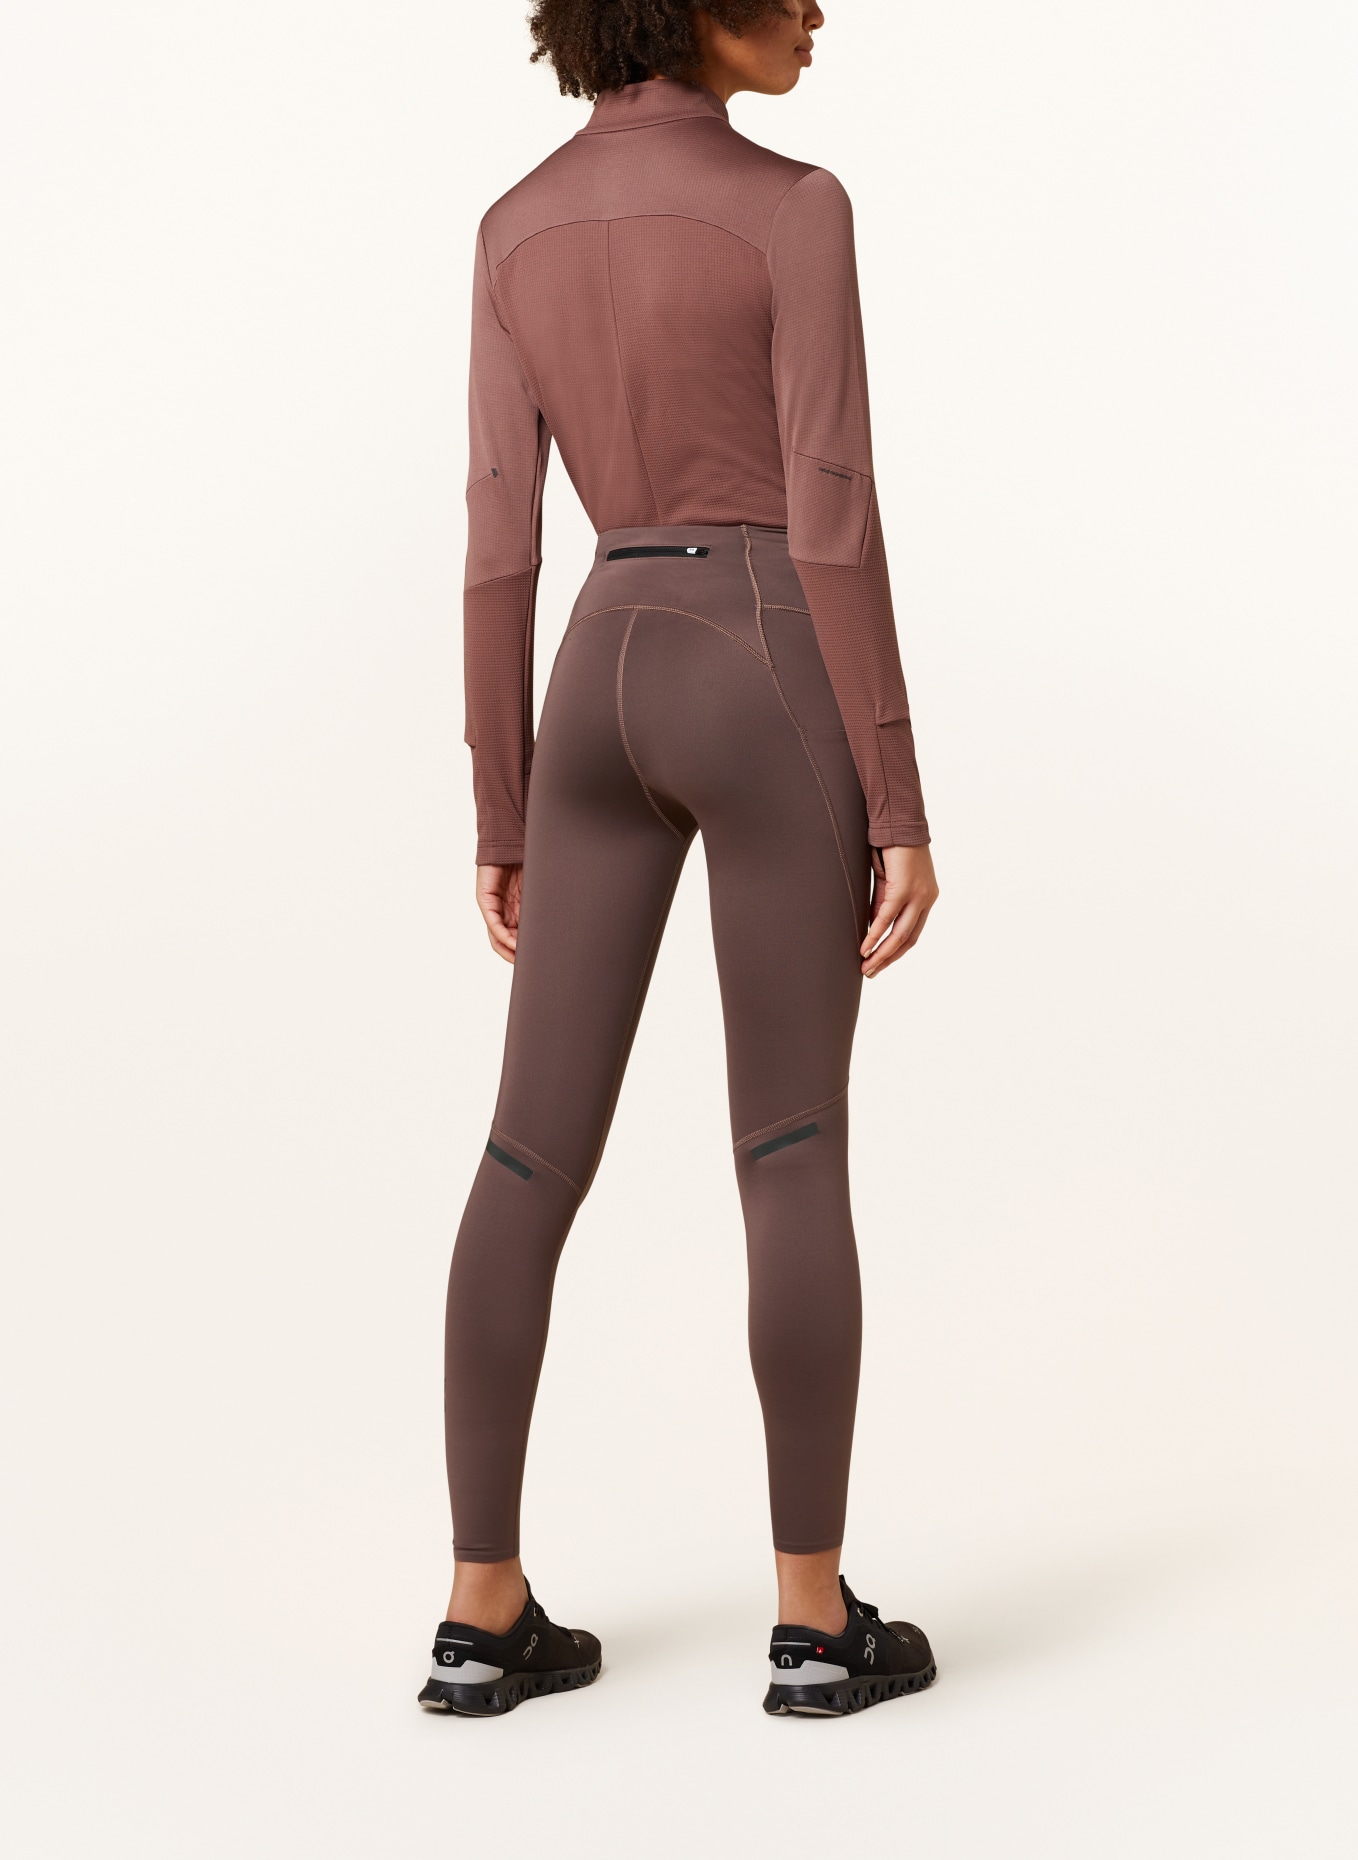 On Running tights PERFORMANCE WINTER in brown